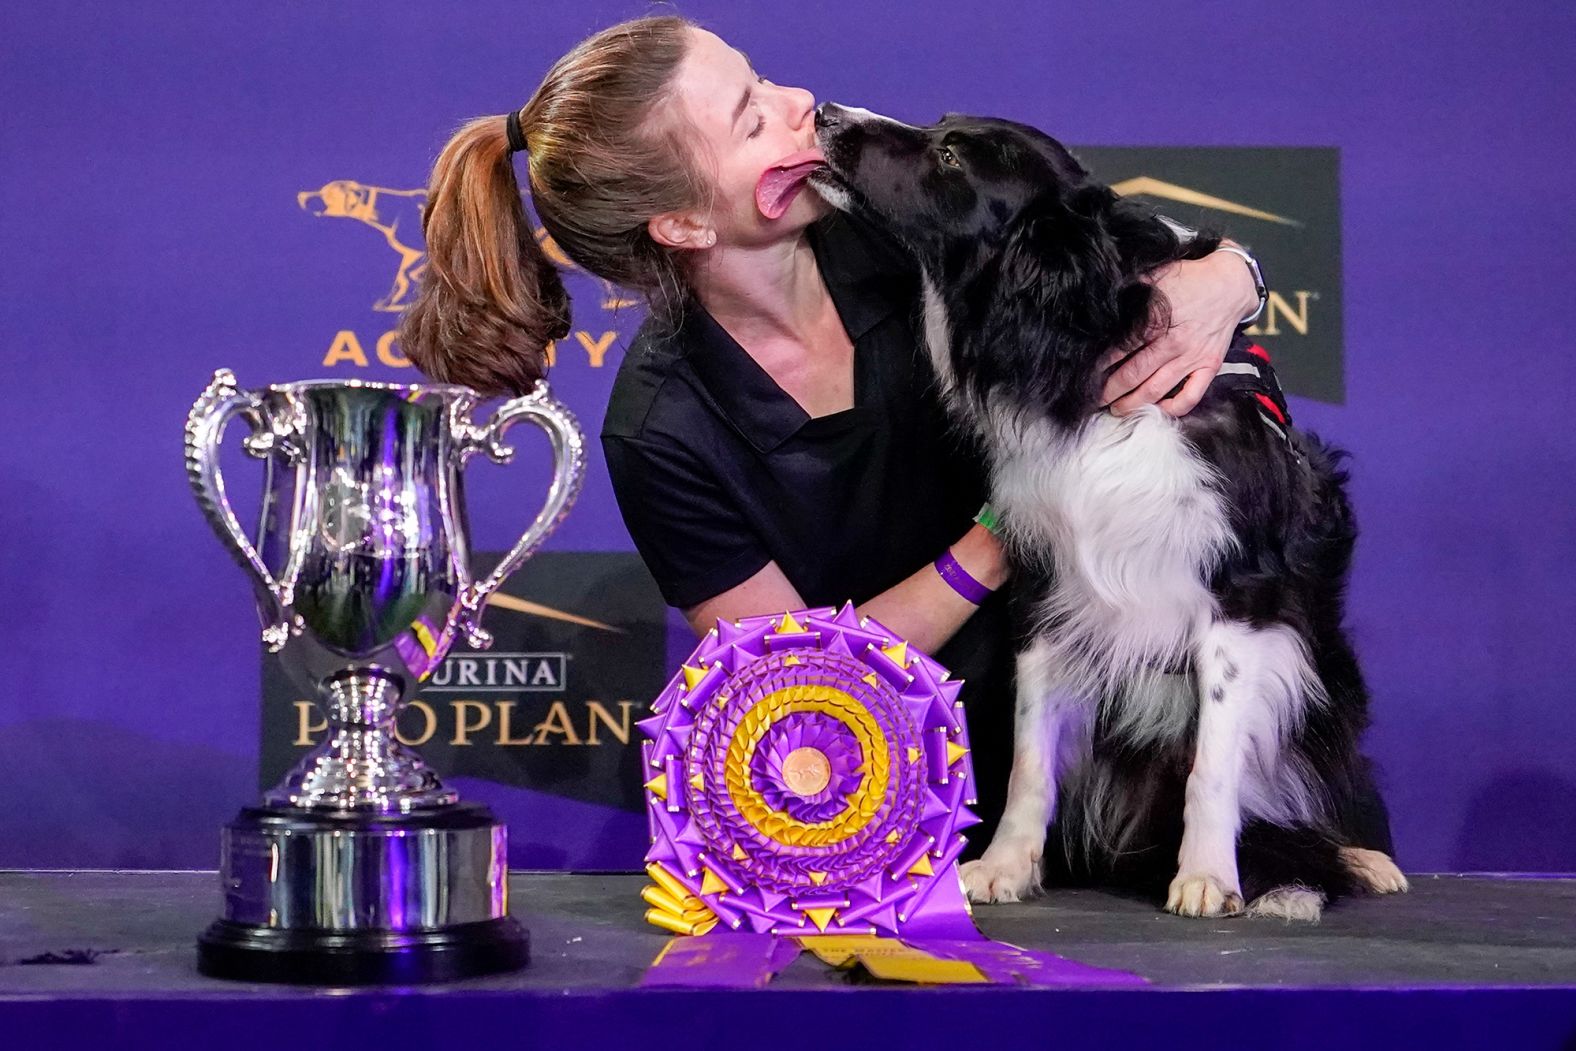 Verb, a border collie, licks his handler, Perry DeWitt, while posing for photographers after winning the agility competition on Friday, June 11, in Tarrytown, New York.